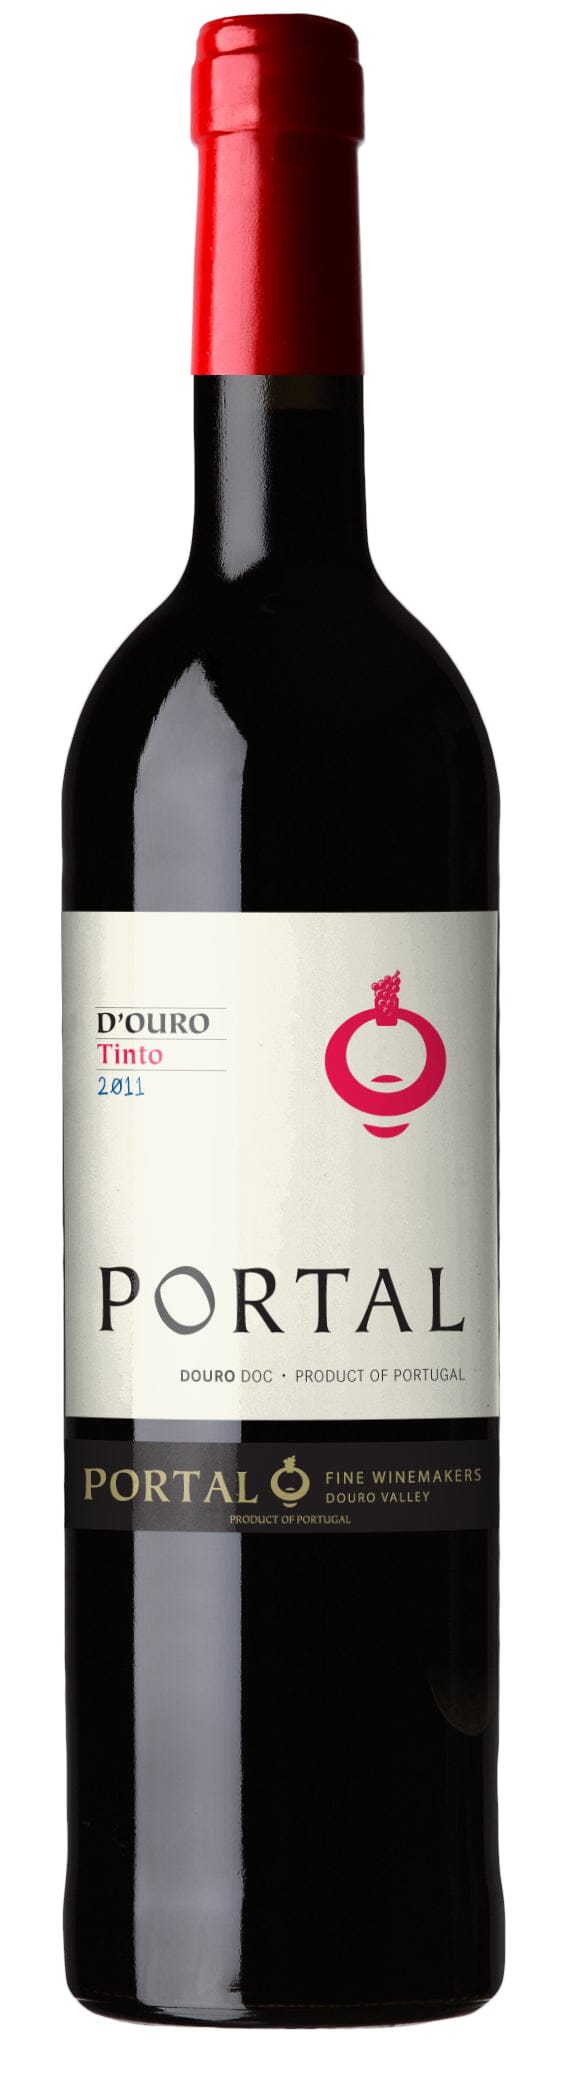 Quinta do Portal d'Ouro, Douro, Portugal Wine Bottle ABS WInes 